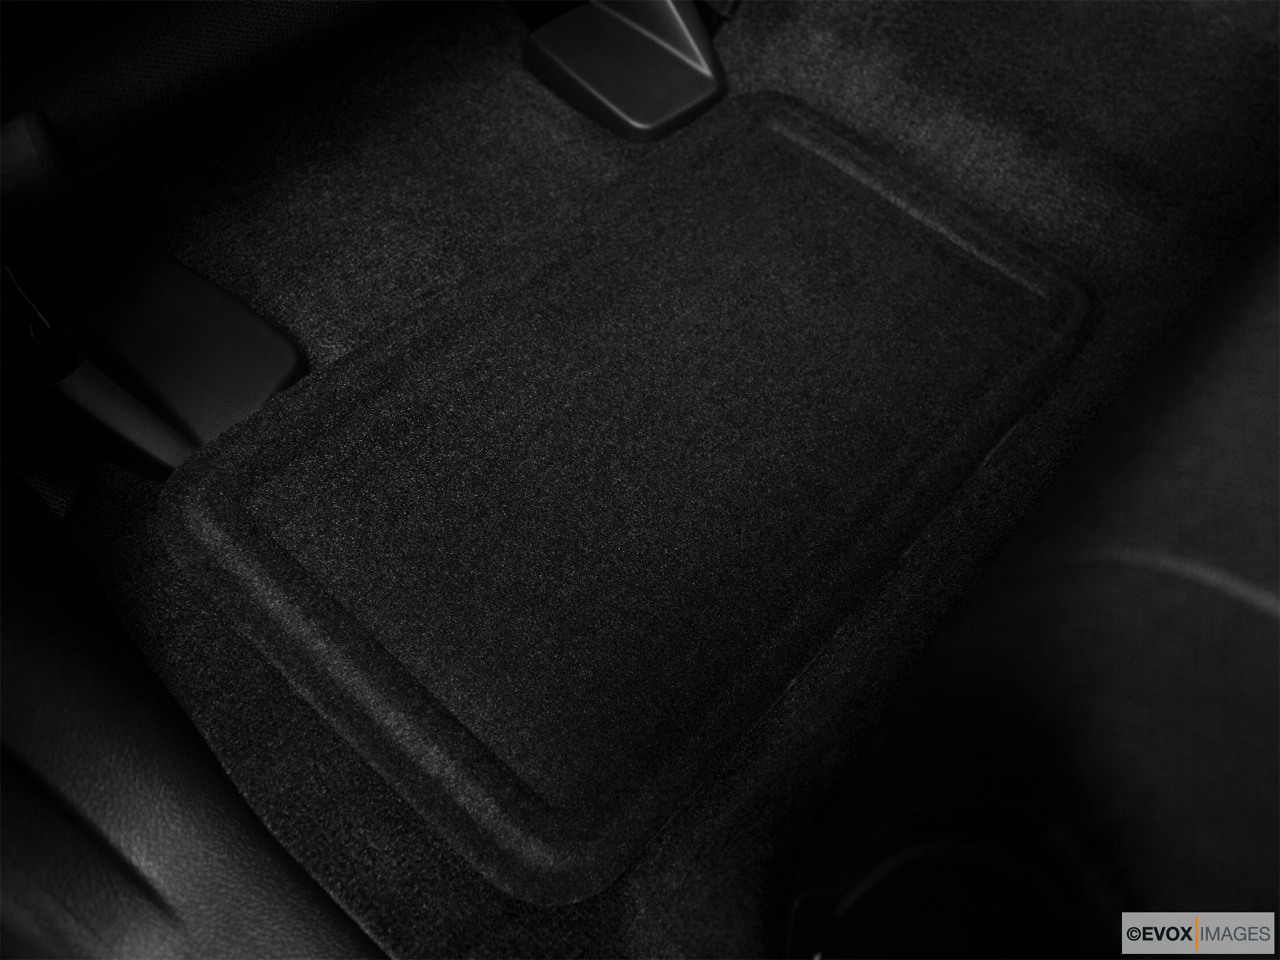 2010 Hummer H3 Base Rear driver's side floor mat. Mid-seat level from outside looking in. 